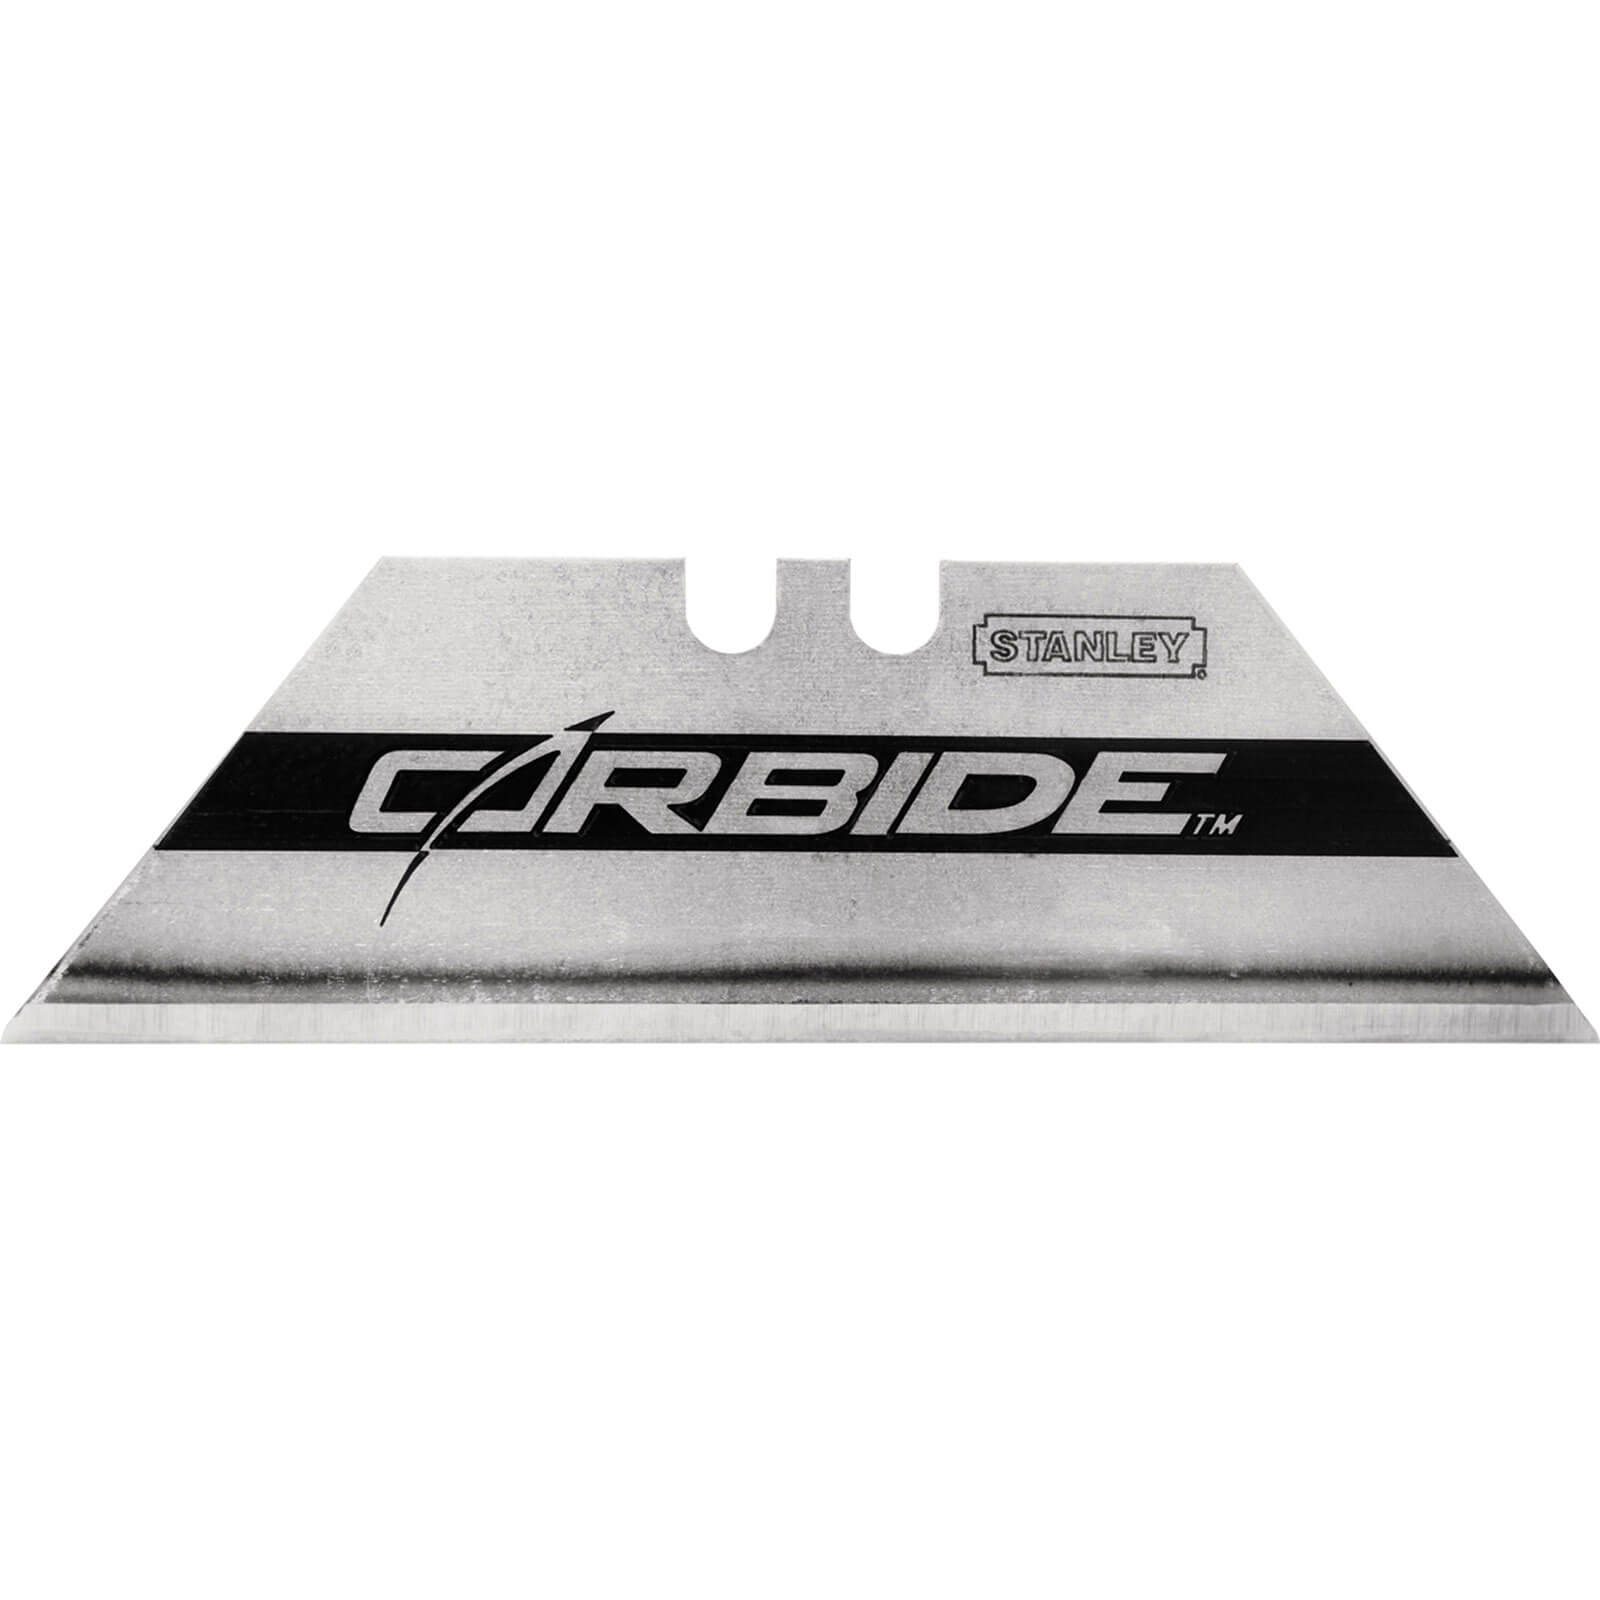 Stanley Carbide Utility Knife Blade Pack of 5